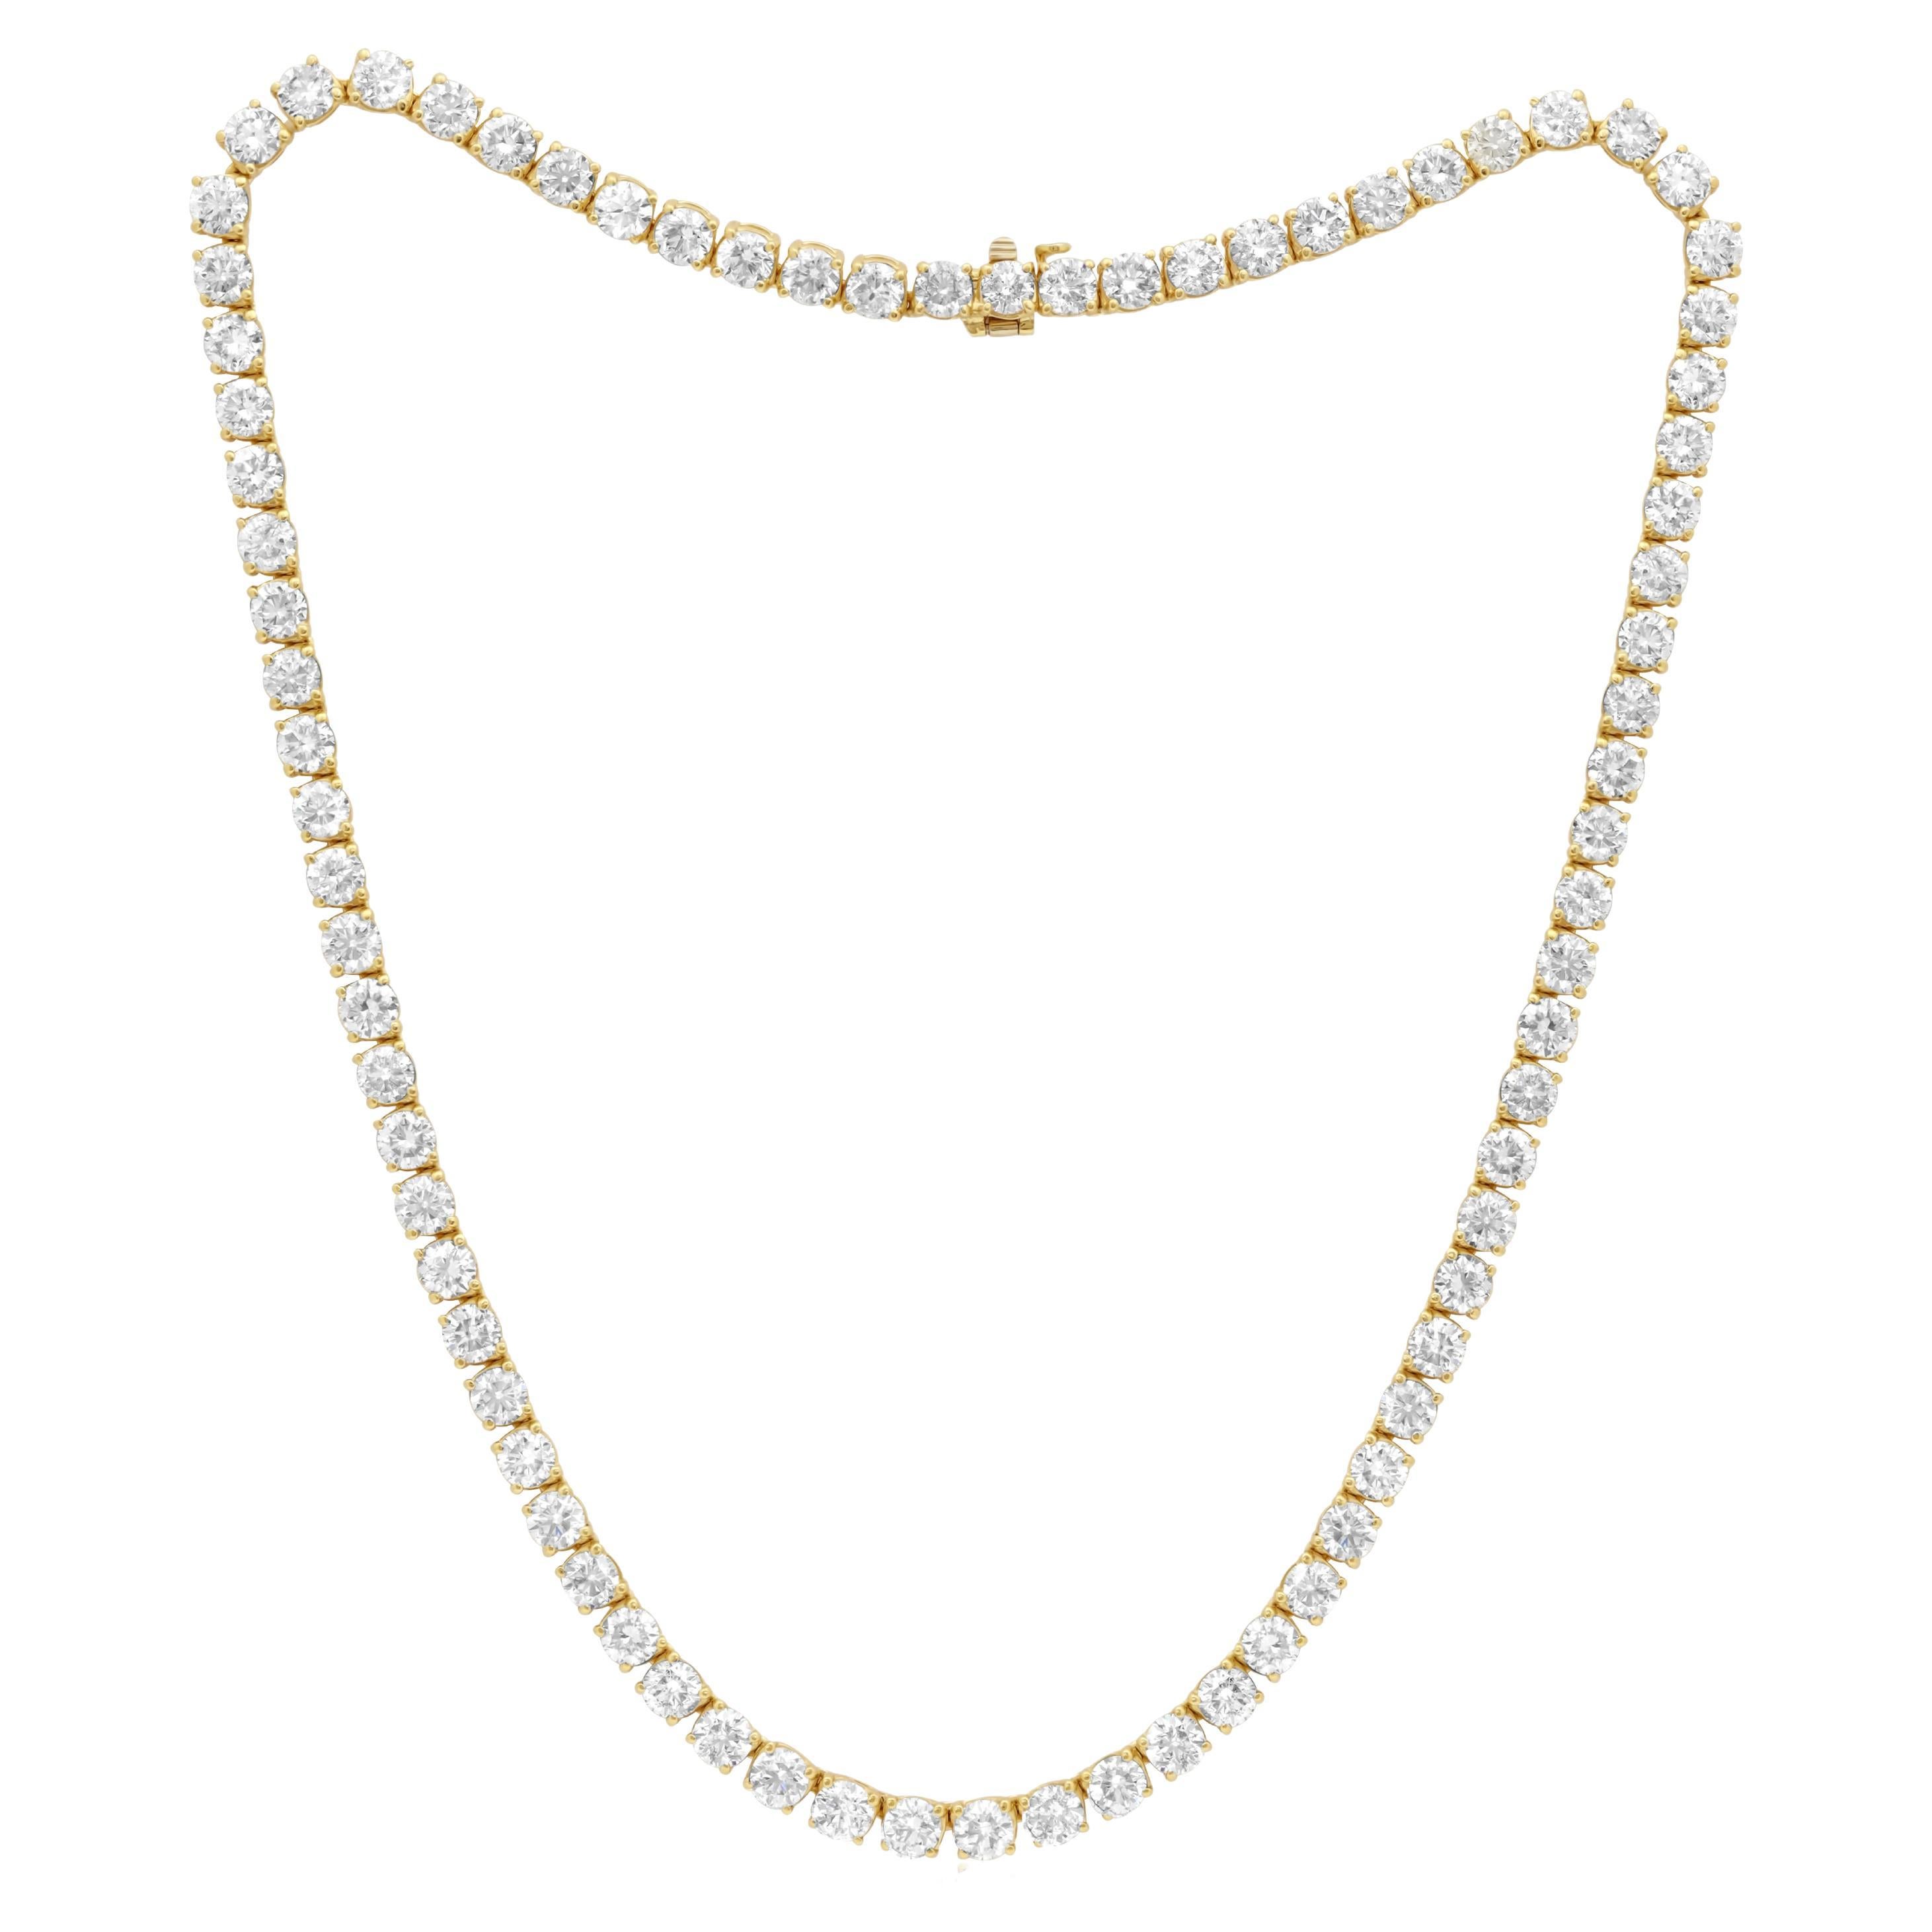 Diana M. Custom 31.50 Cts 4 Prong Round  Diamond 18k Yellow Gold Tennis Necklace For Sale